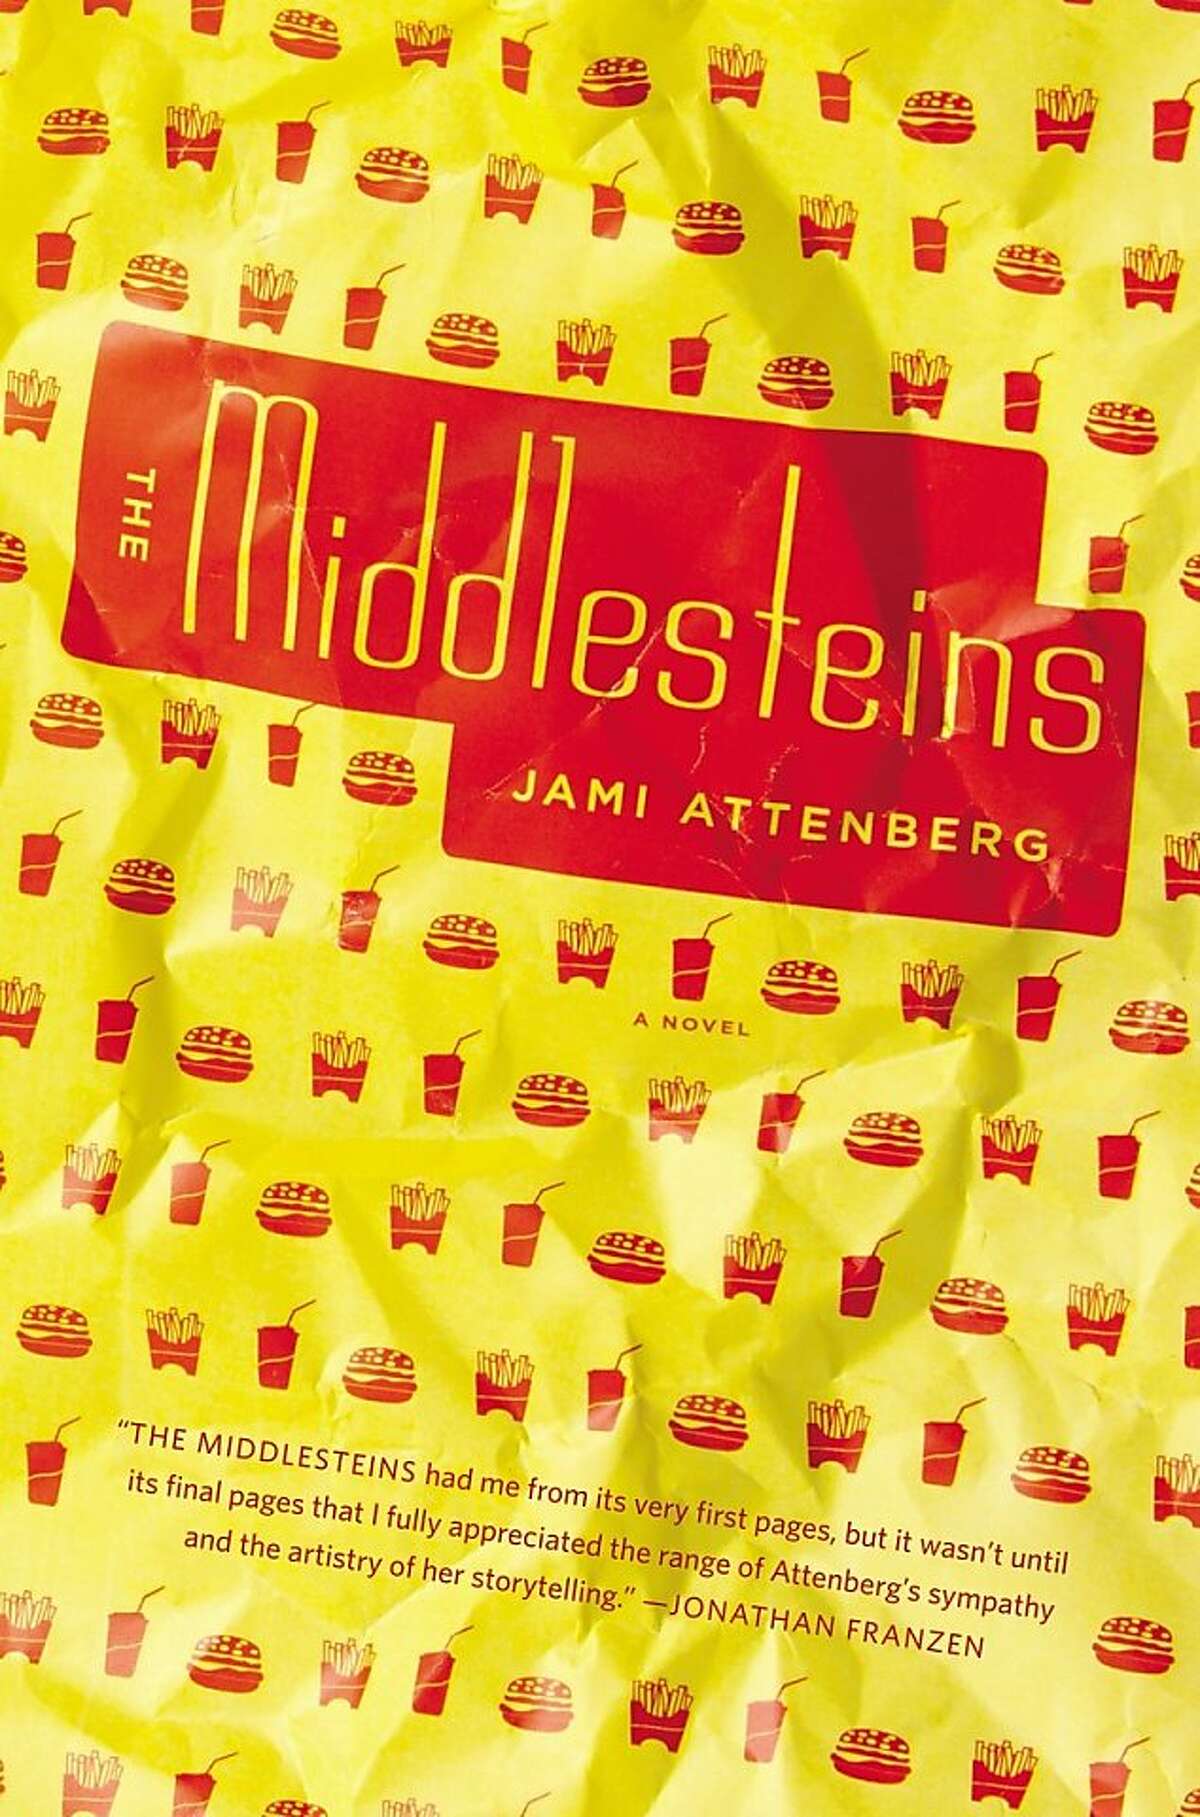 The Middlesteins, by Jami Attenberg